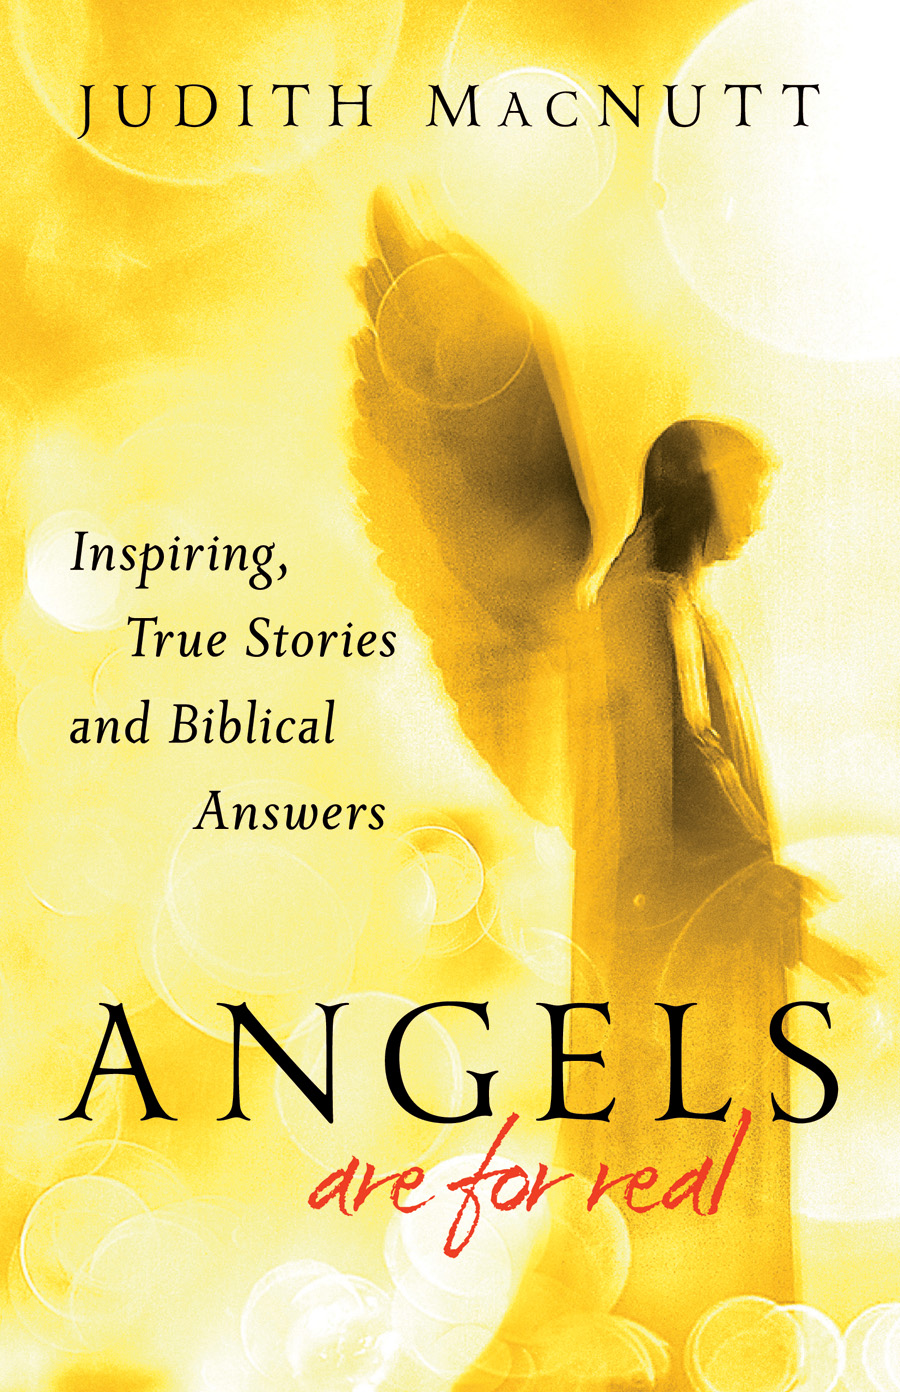 Book Review: Judith MacNutt’s Angels Are for Real